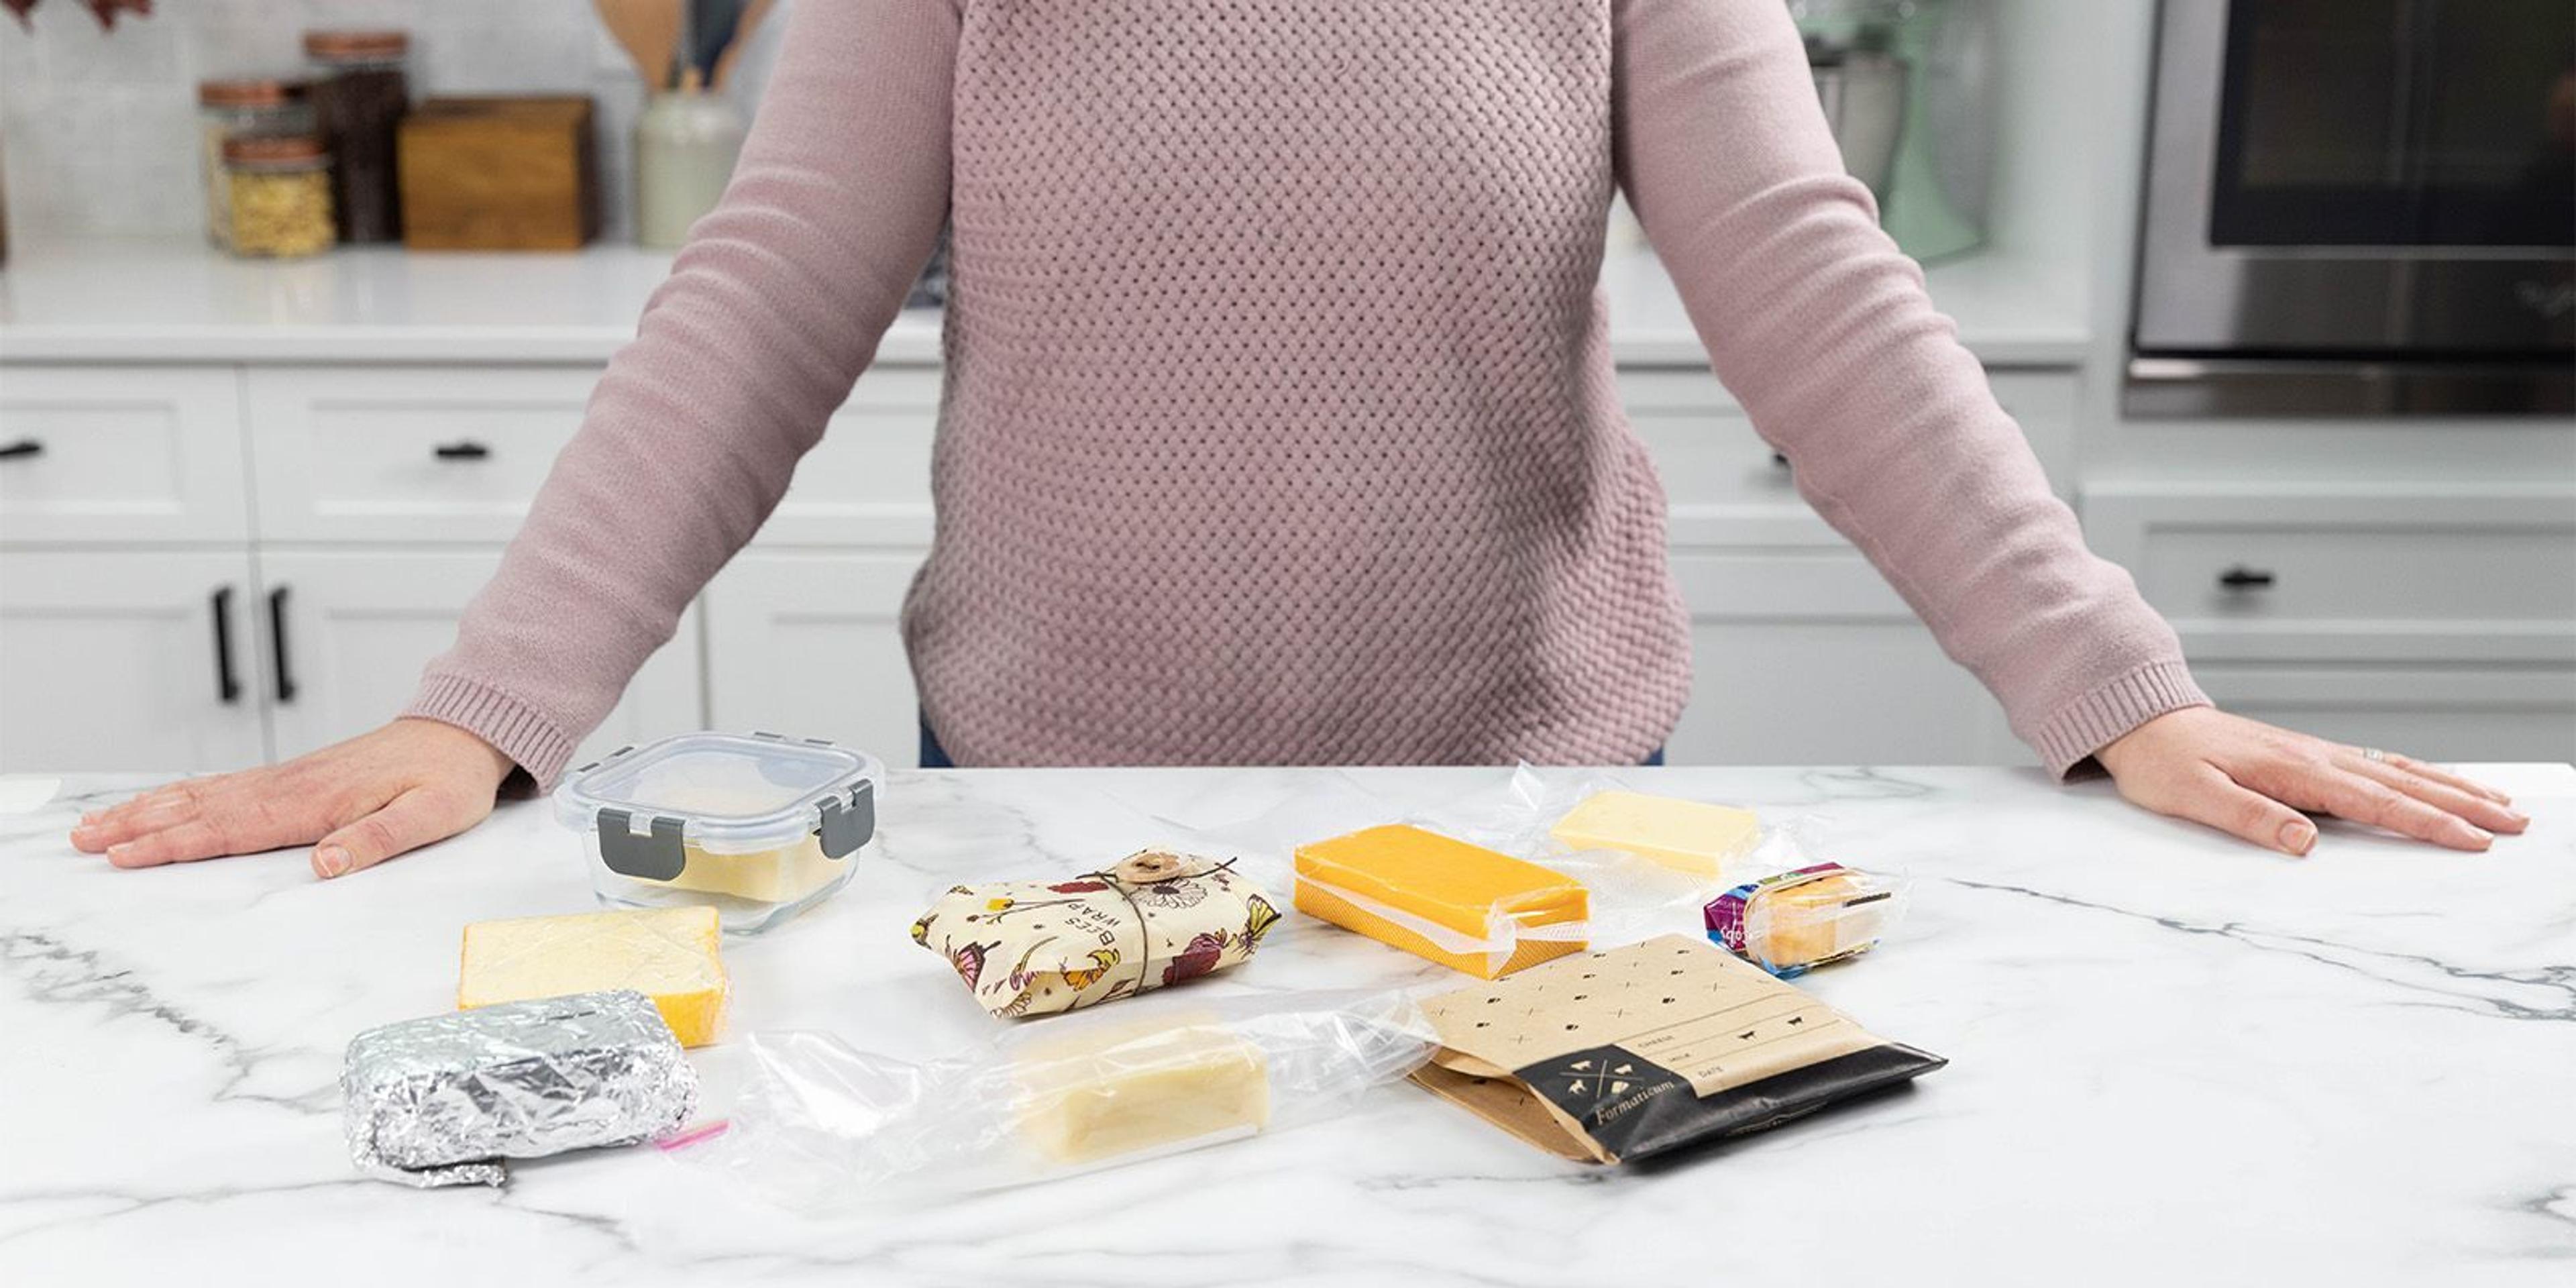 Cheese on the counter wrapped in various preservation methods such as aluminum foil, plastic and cheese paper.